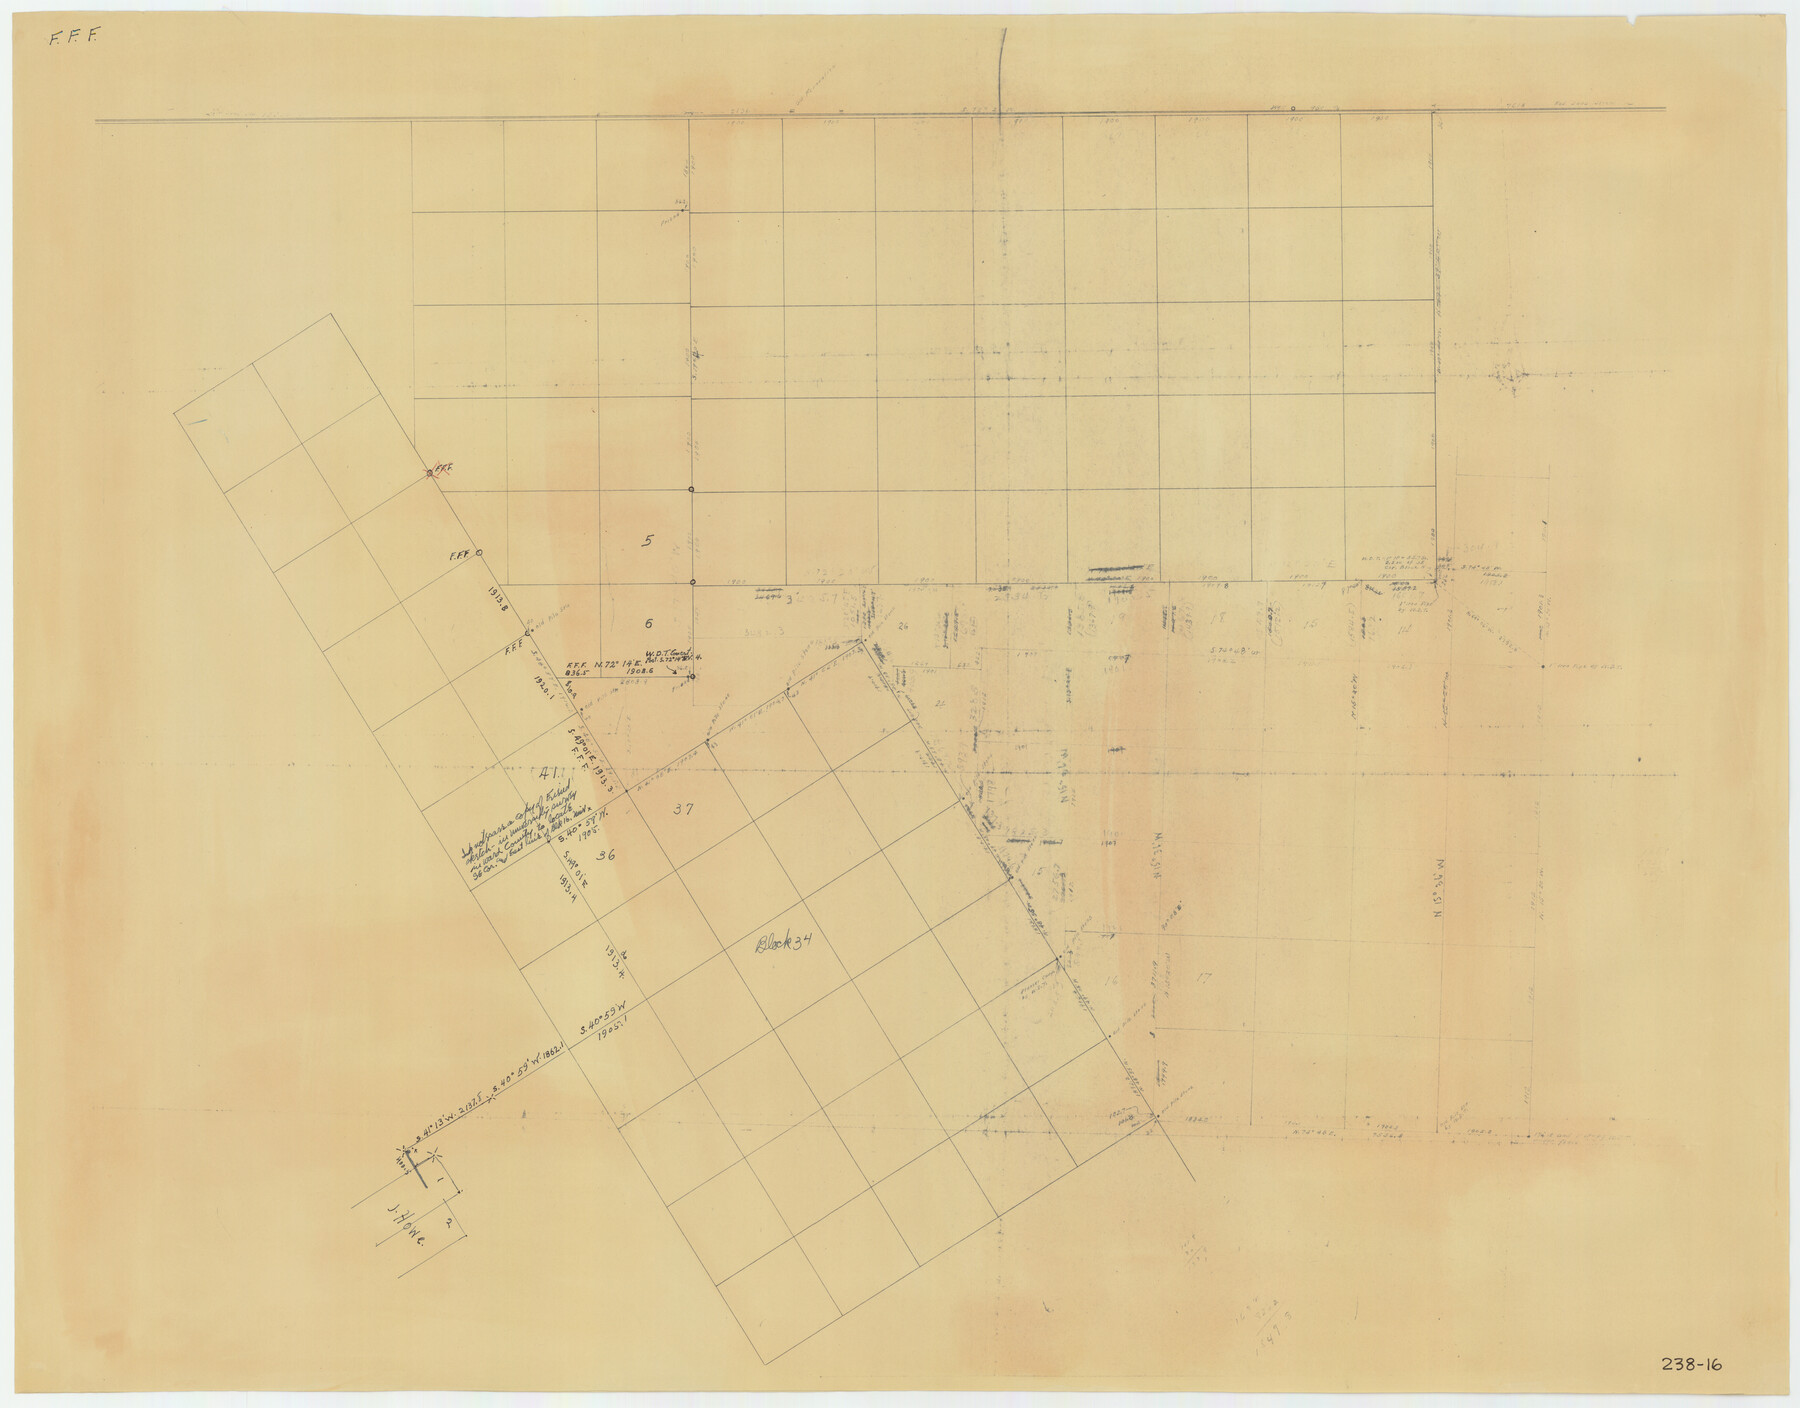 91954, [Sketch around H. & T. C. Block 34 and PSL Block B19], Twichell Survey Records